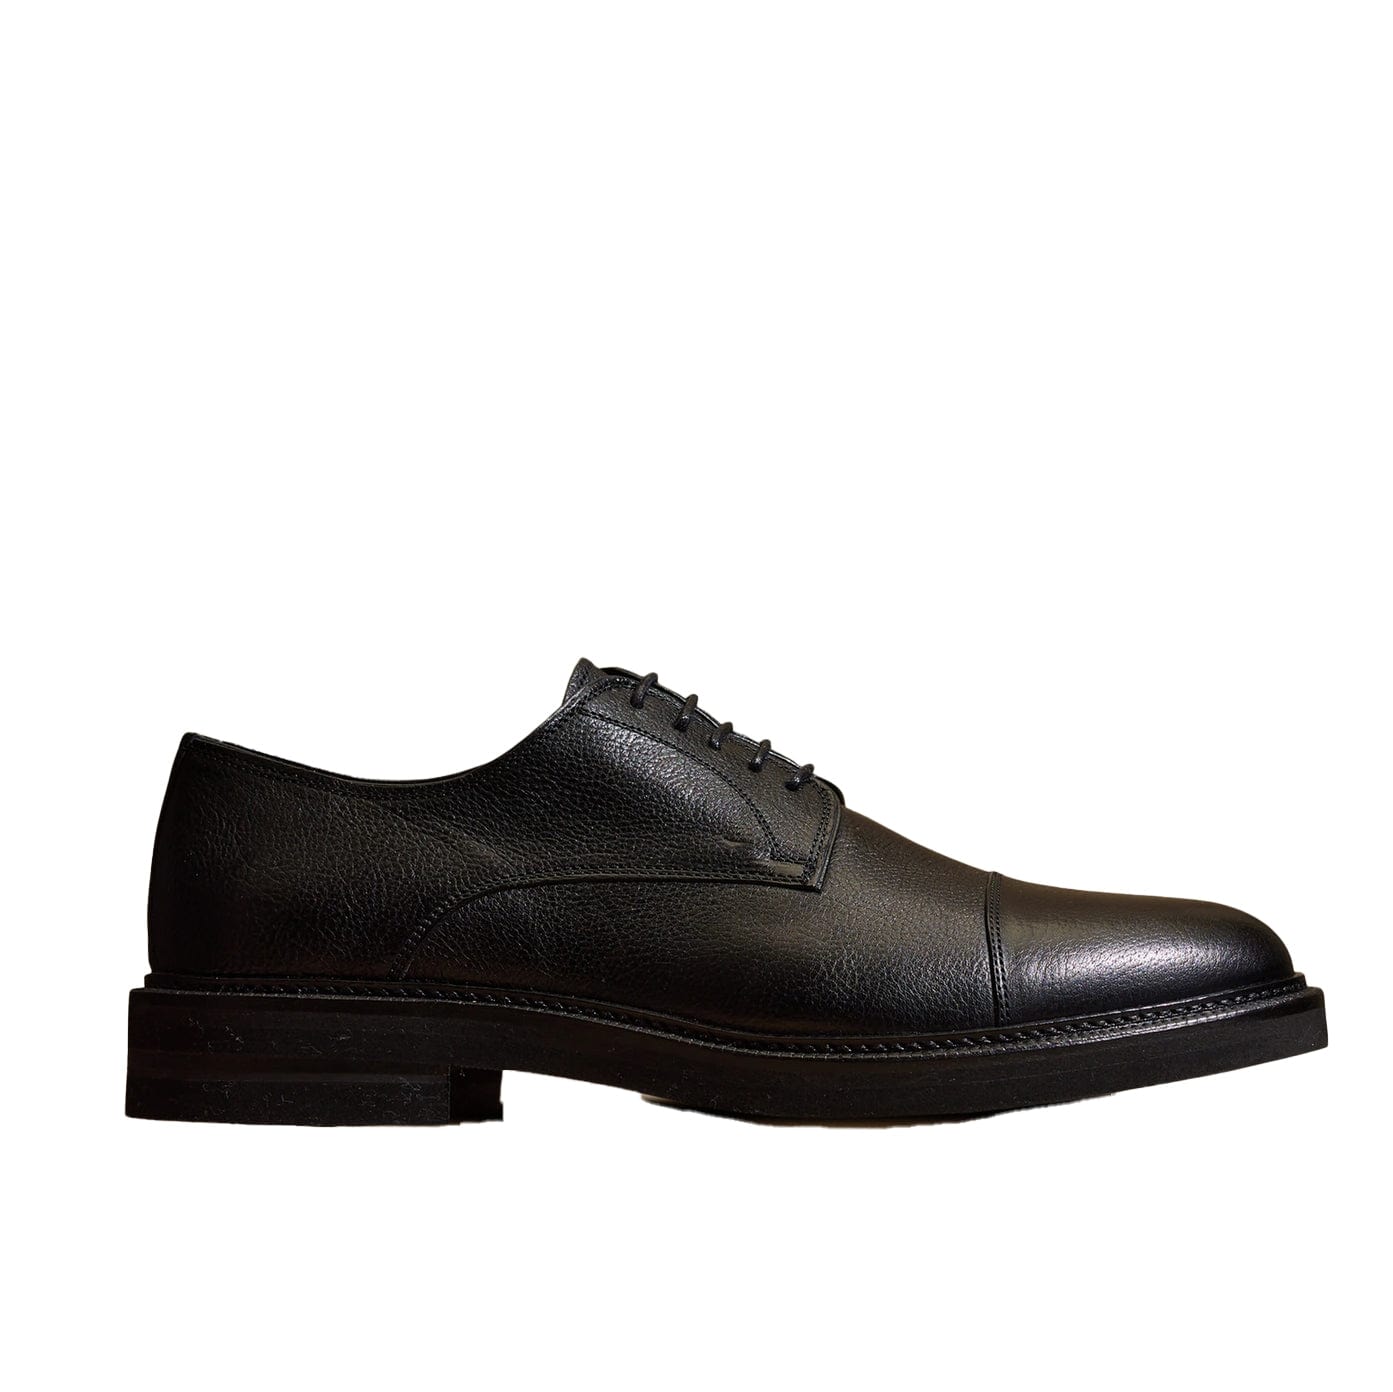 ceehuteey Men's Leather Classic Cap-Toe Oxford Shoes